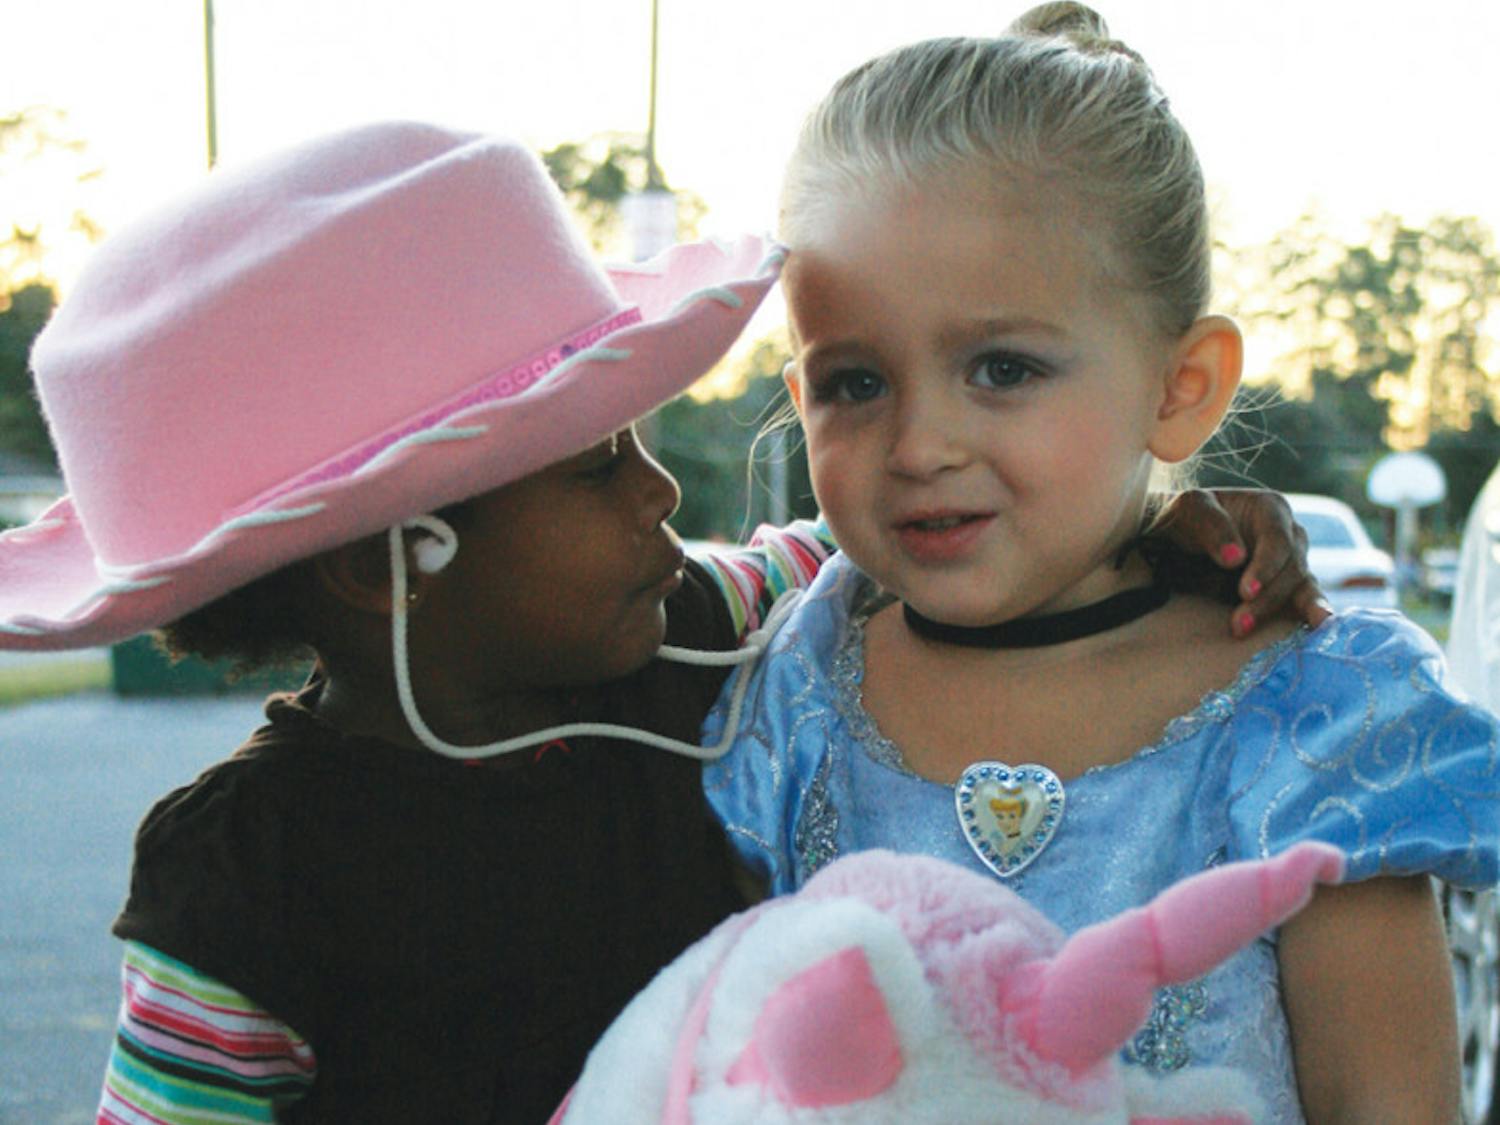 Two-year-old Farrah, right, and Davis spend Halloween together with Williams, Davis’ adopted father, and his mother. Farrah and Davis are cousins, but Williams said they are growing up like sisters.